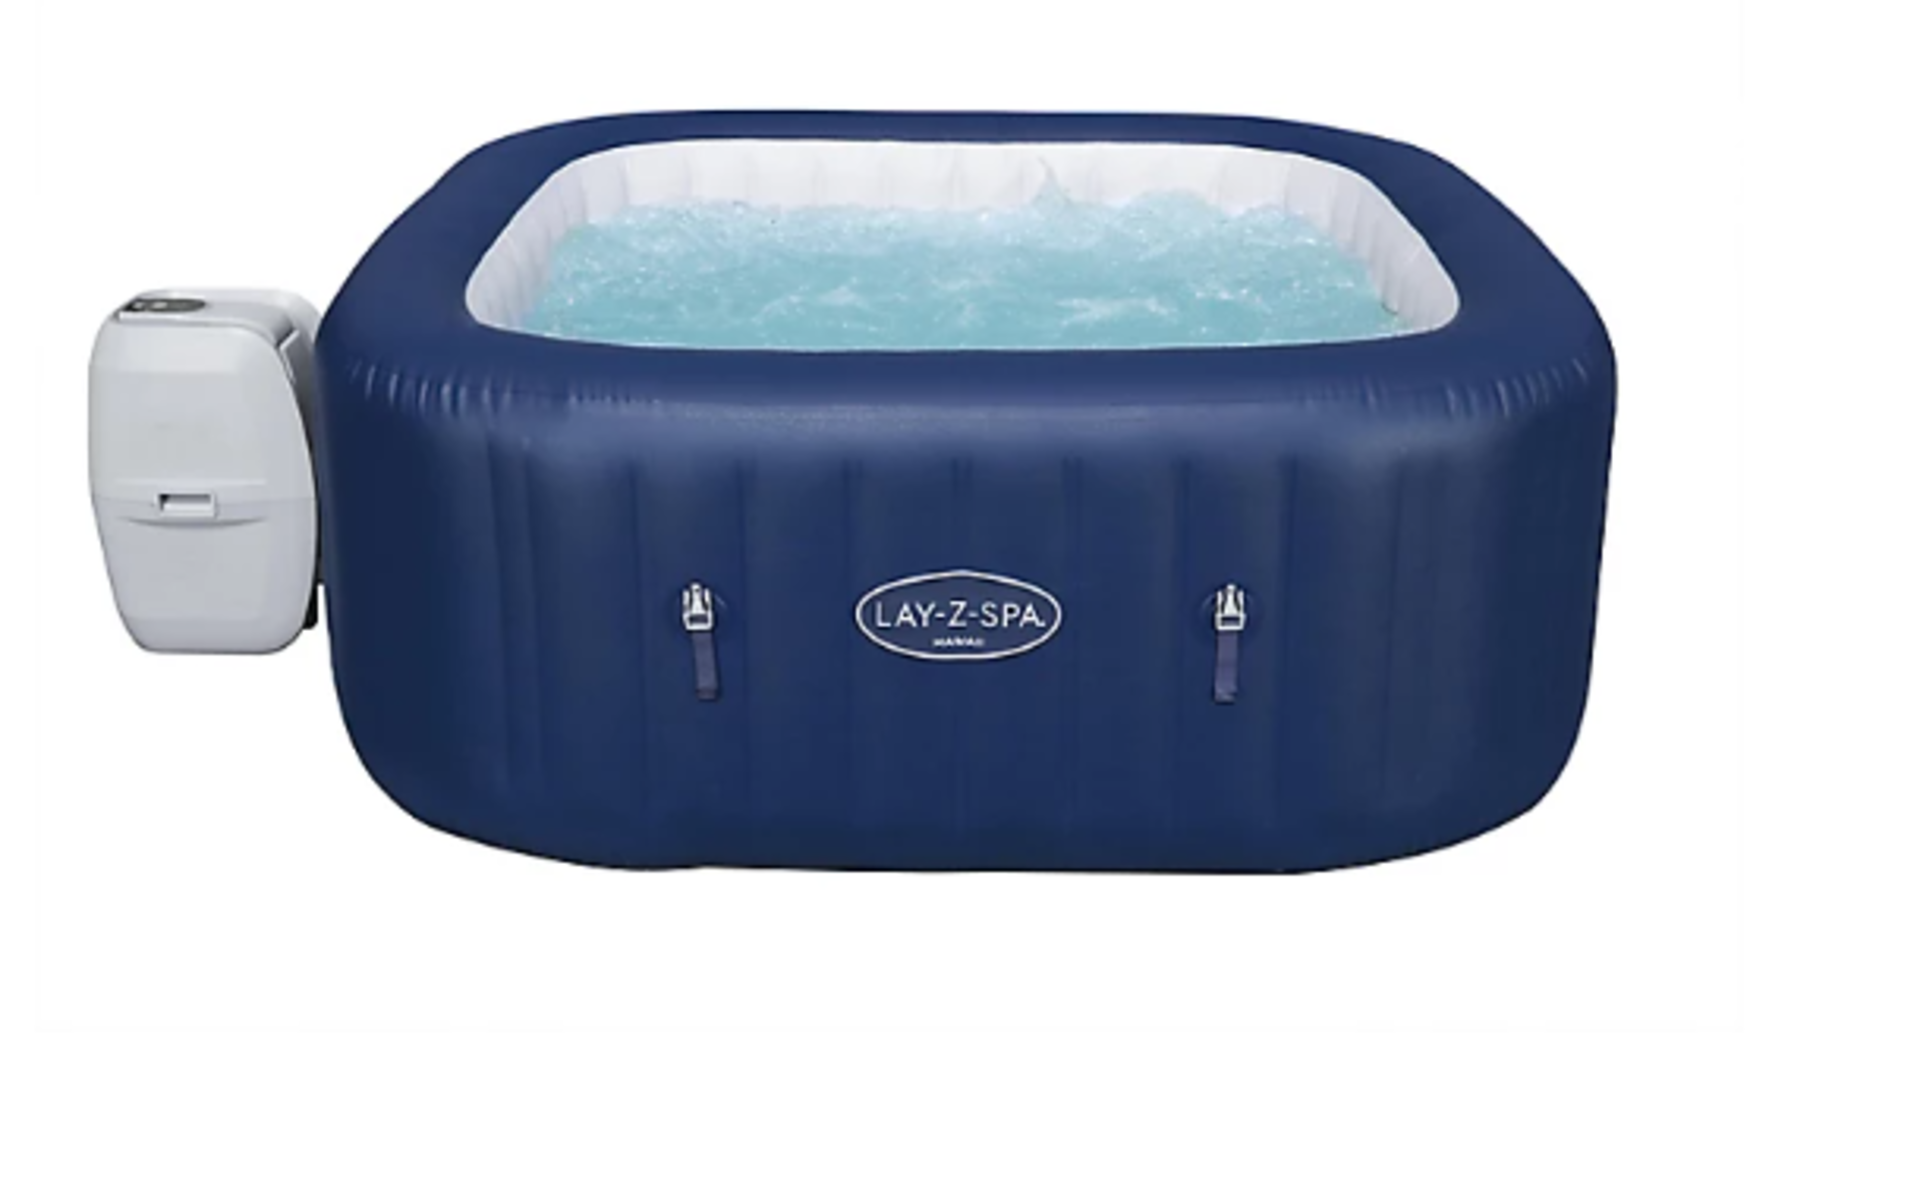 Trade Lot 4 x Lay-Z-Spa Hawaii Airjet 6 person Inflatable Hot Tub. - ER.RRP £450.00 each. The Lay-Z